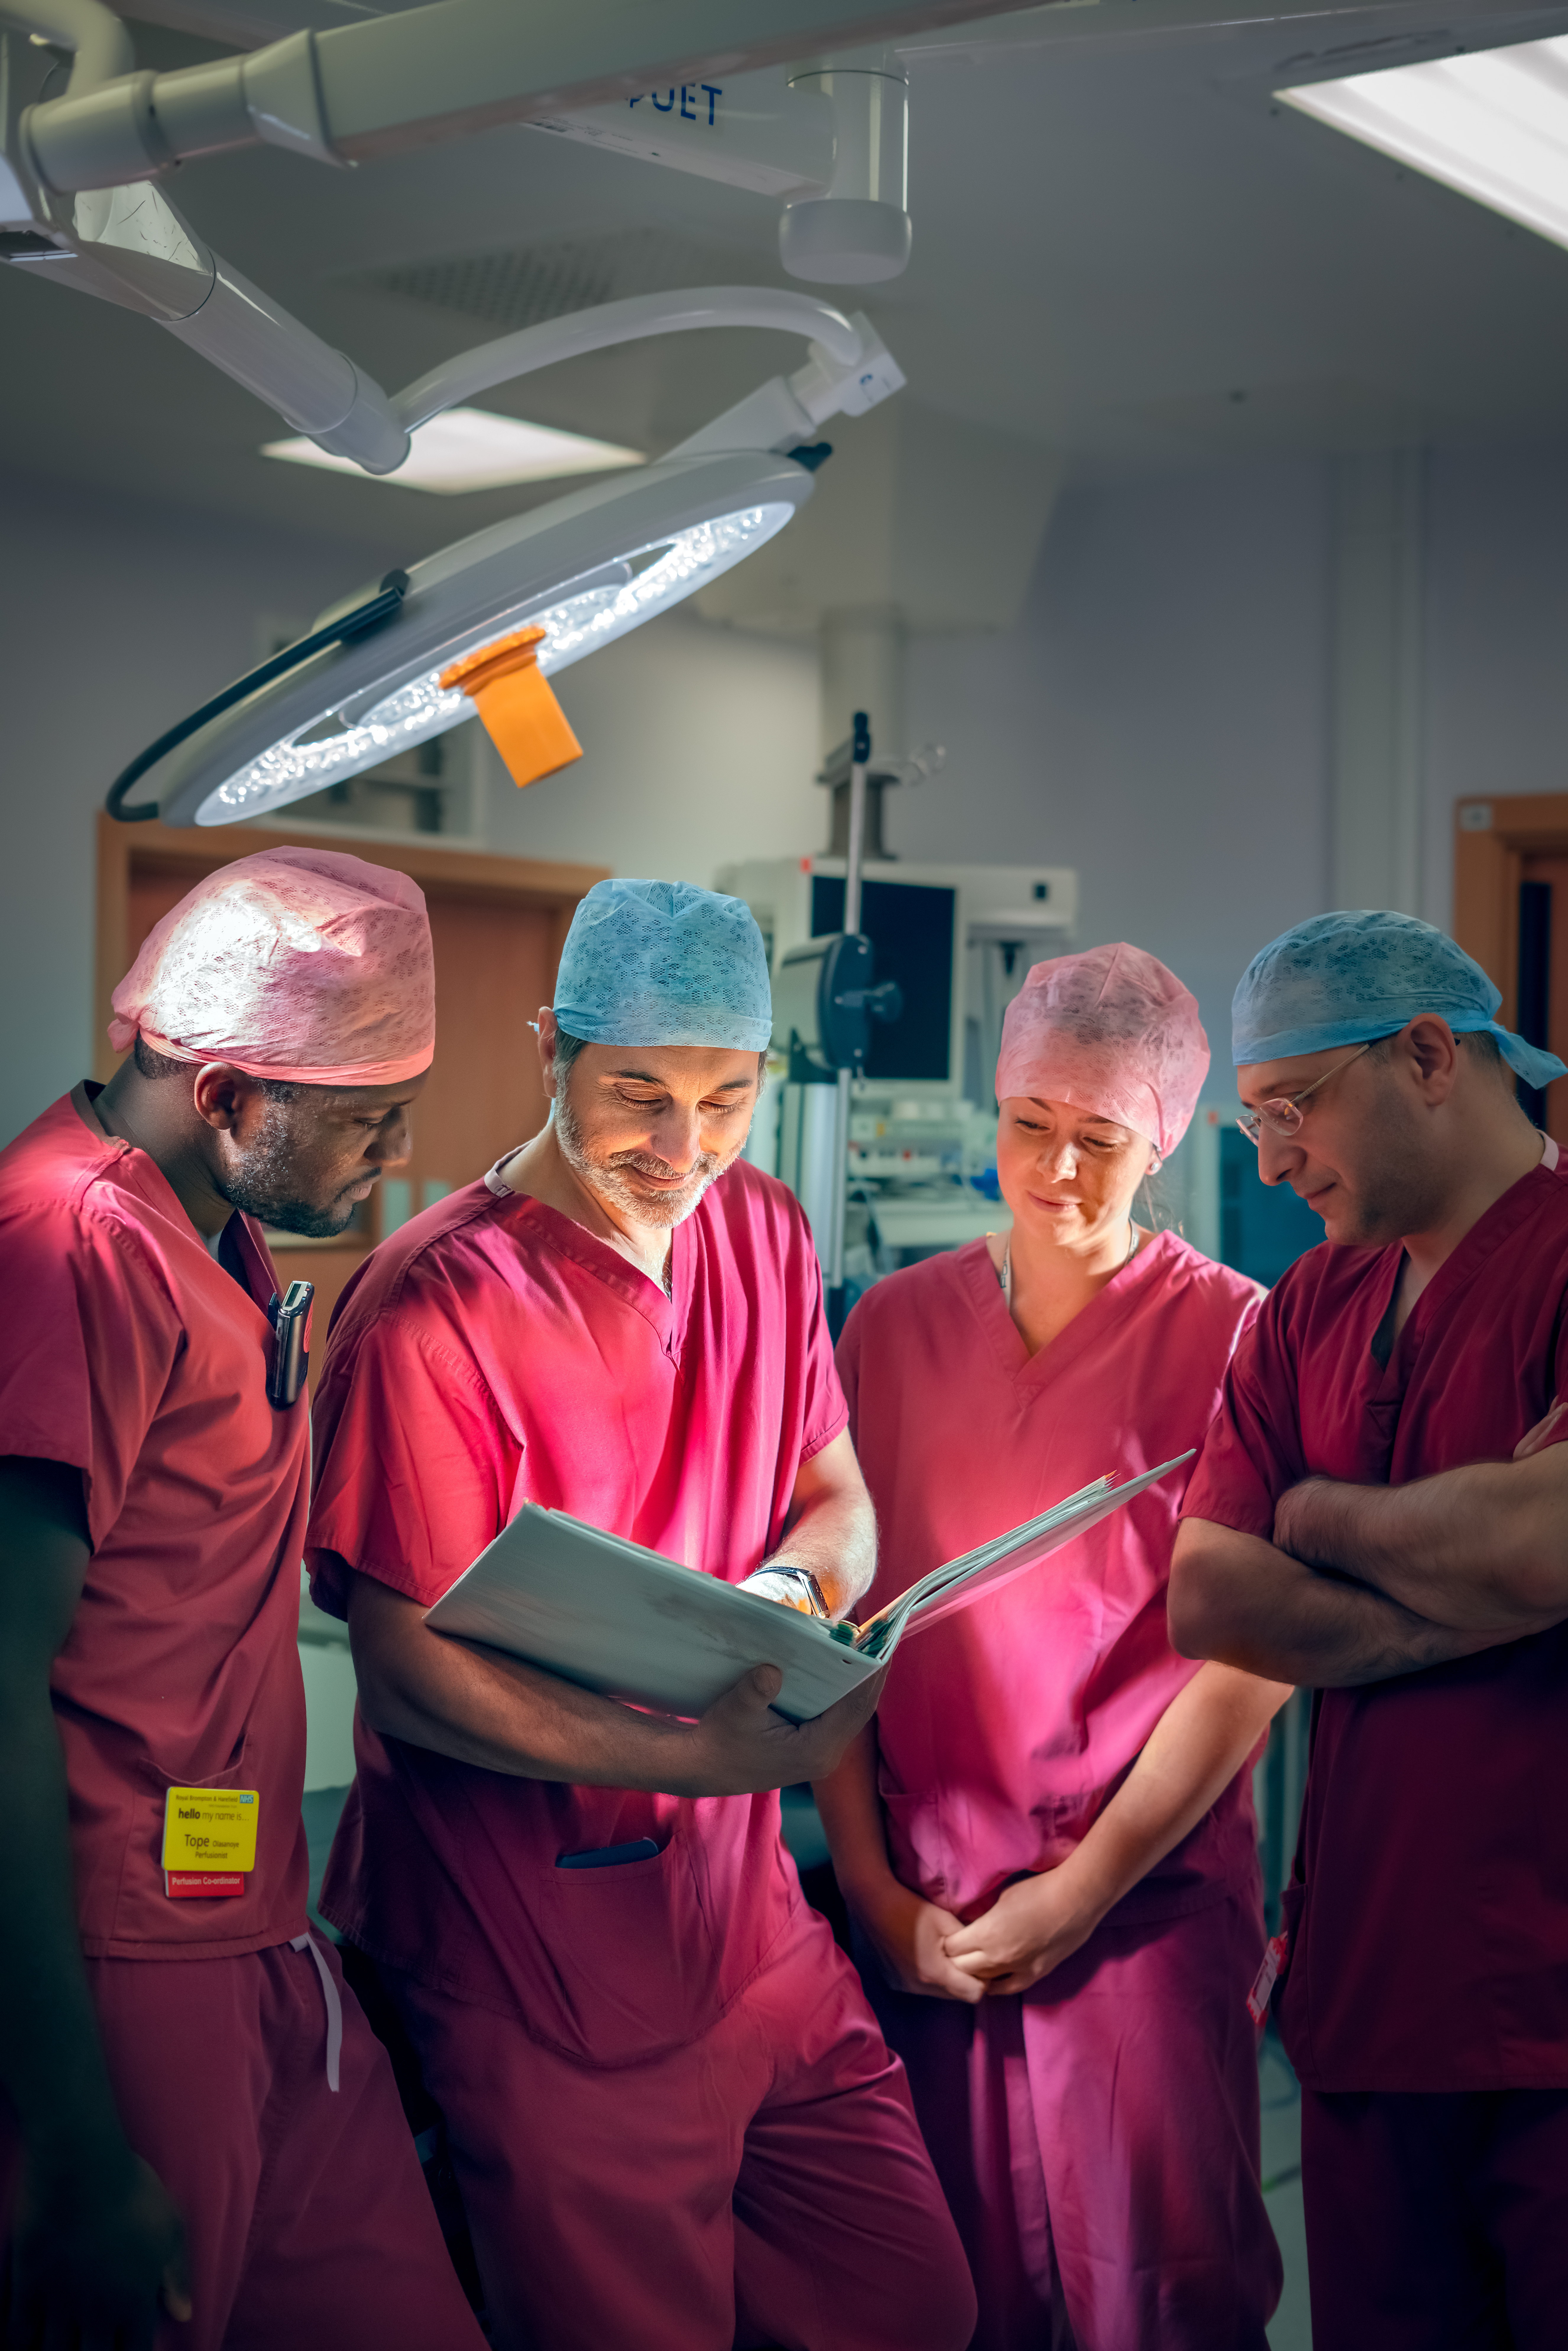 Surgeons looking at file together